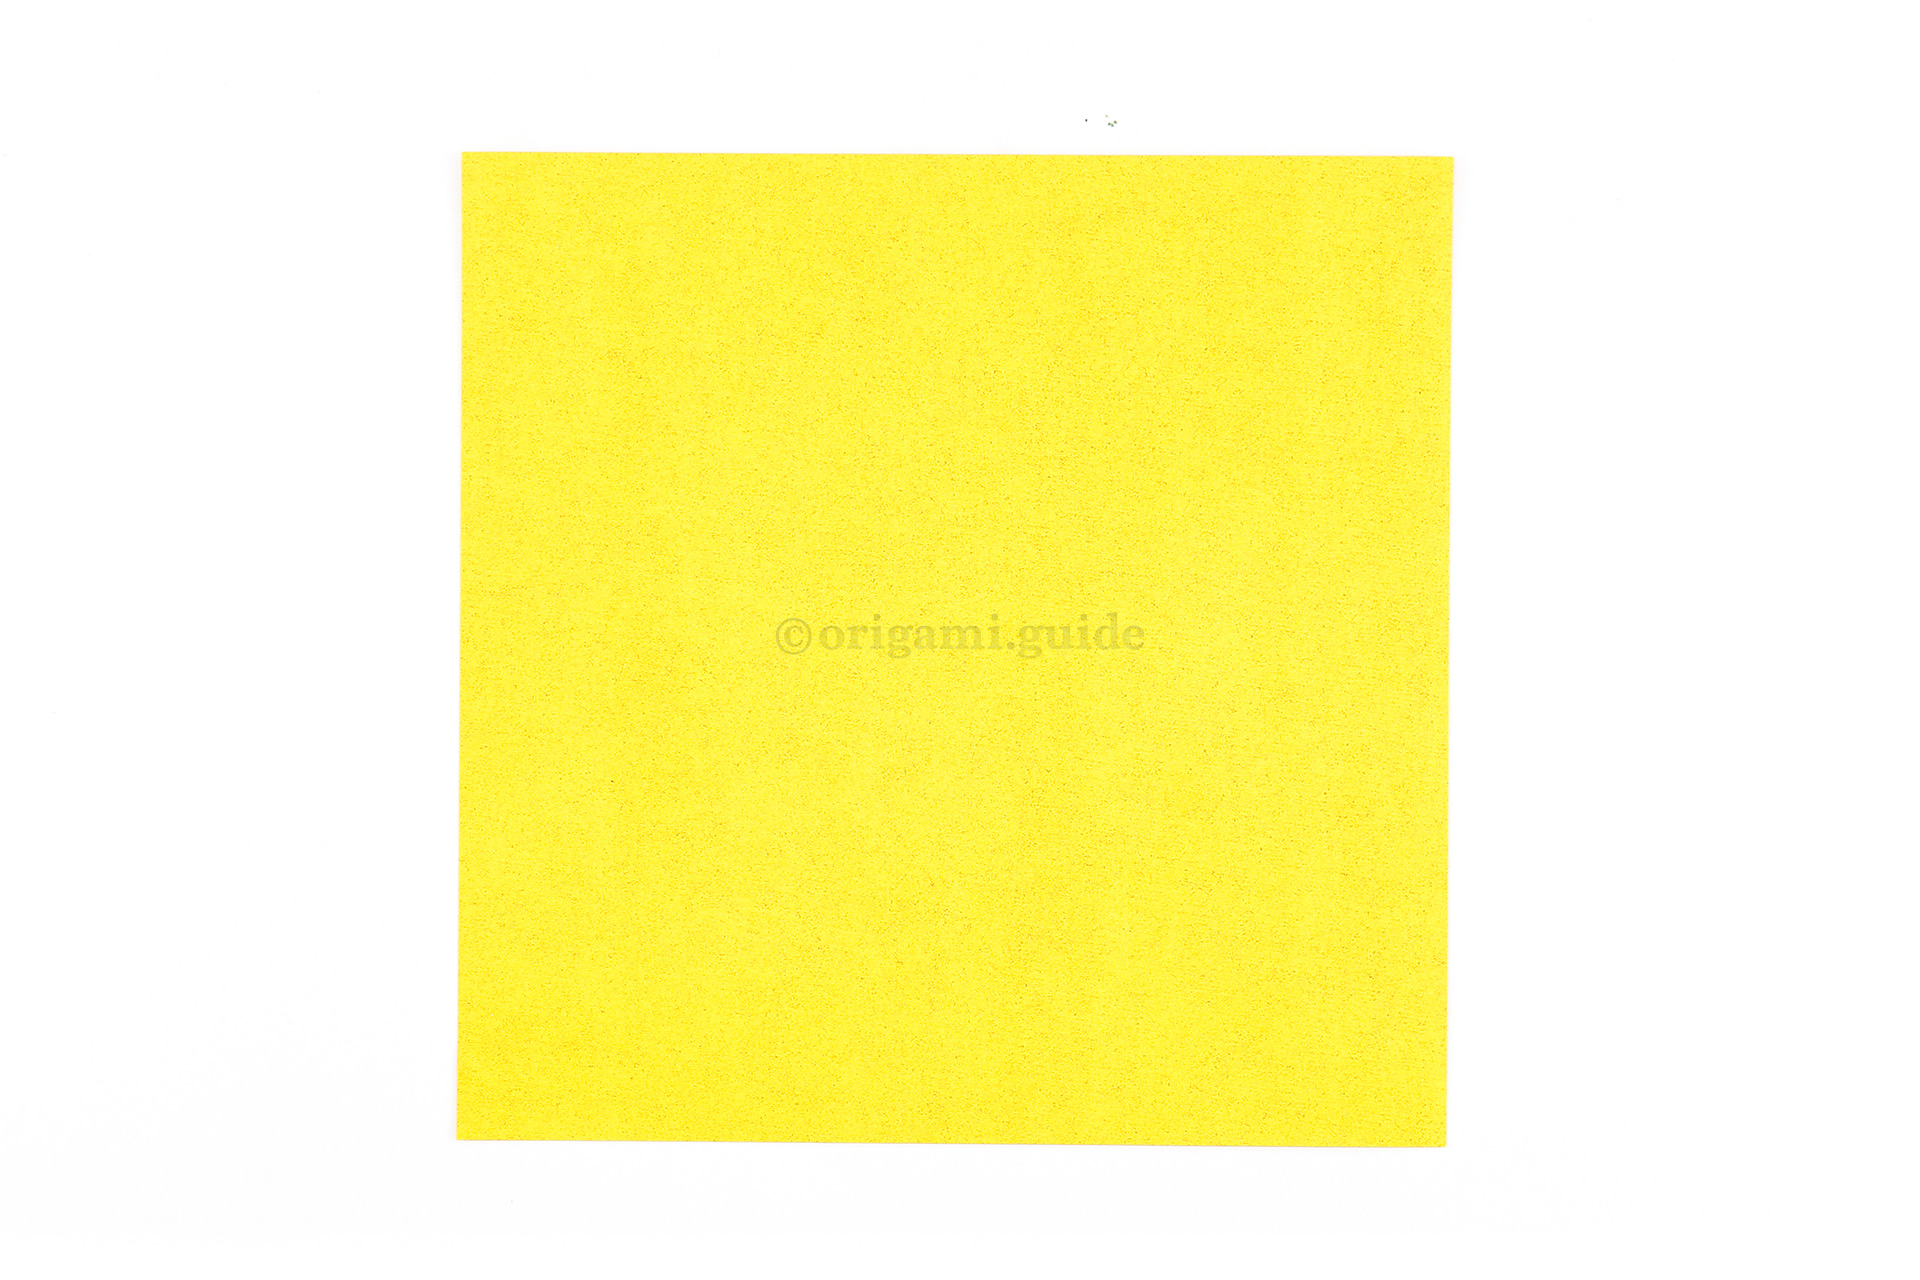 This is the front of our origami paper, our origami fish will end up being this colour.